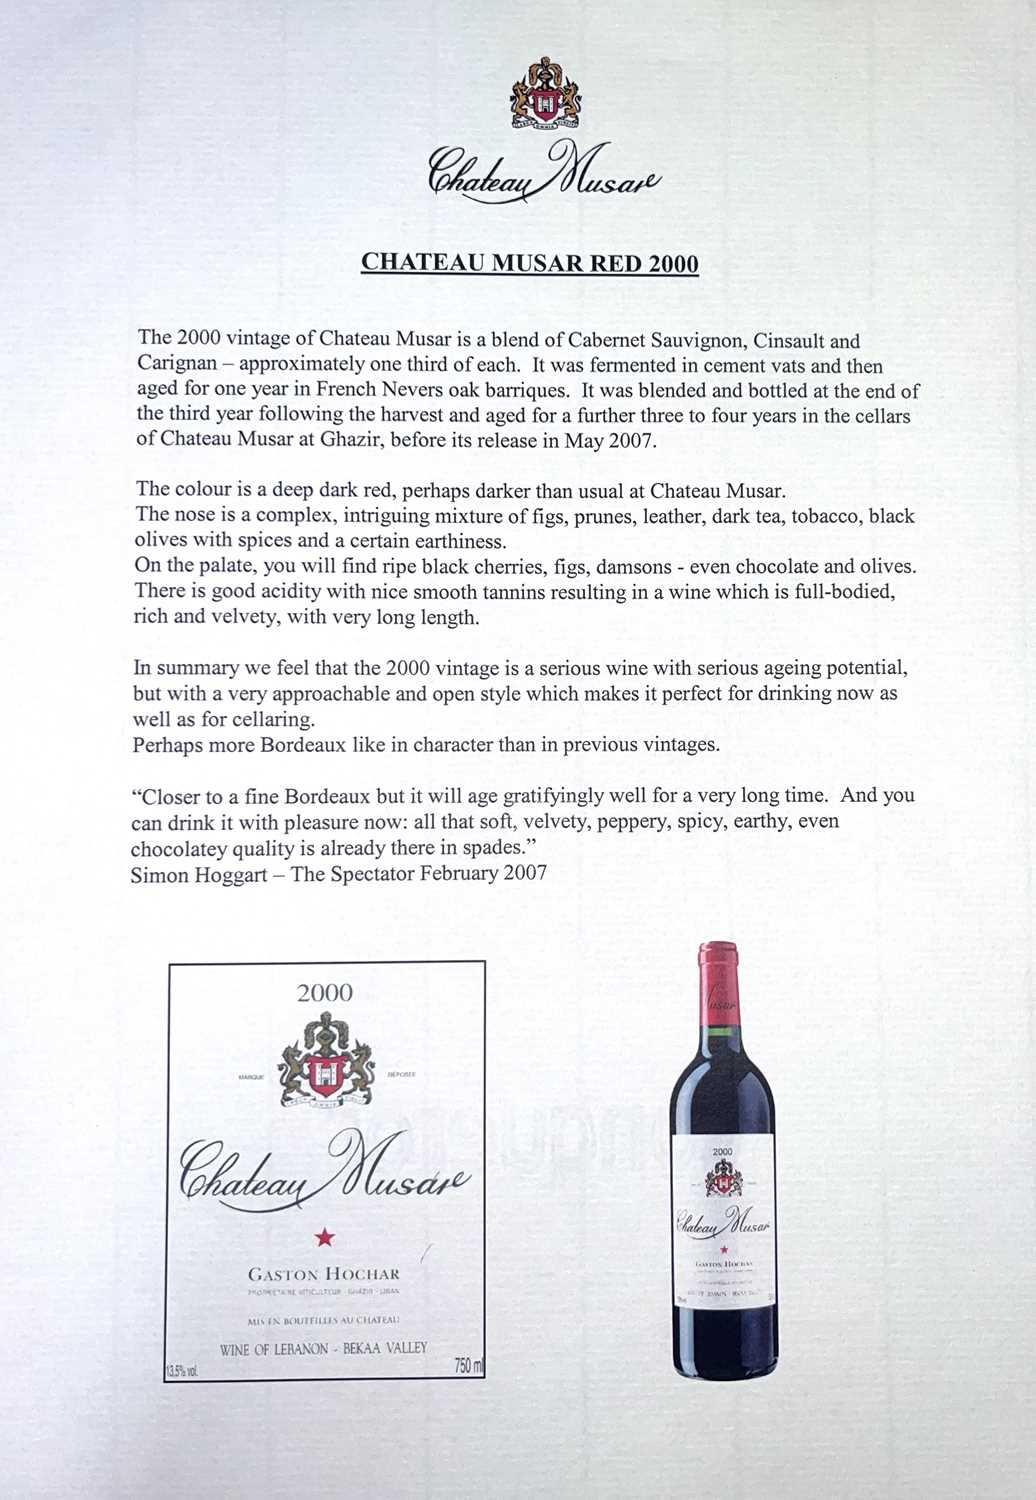 Chateau Musar 2000 - Image 2 of 2